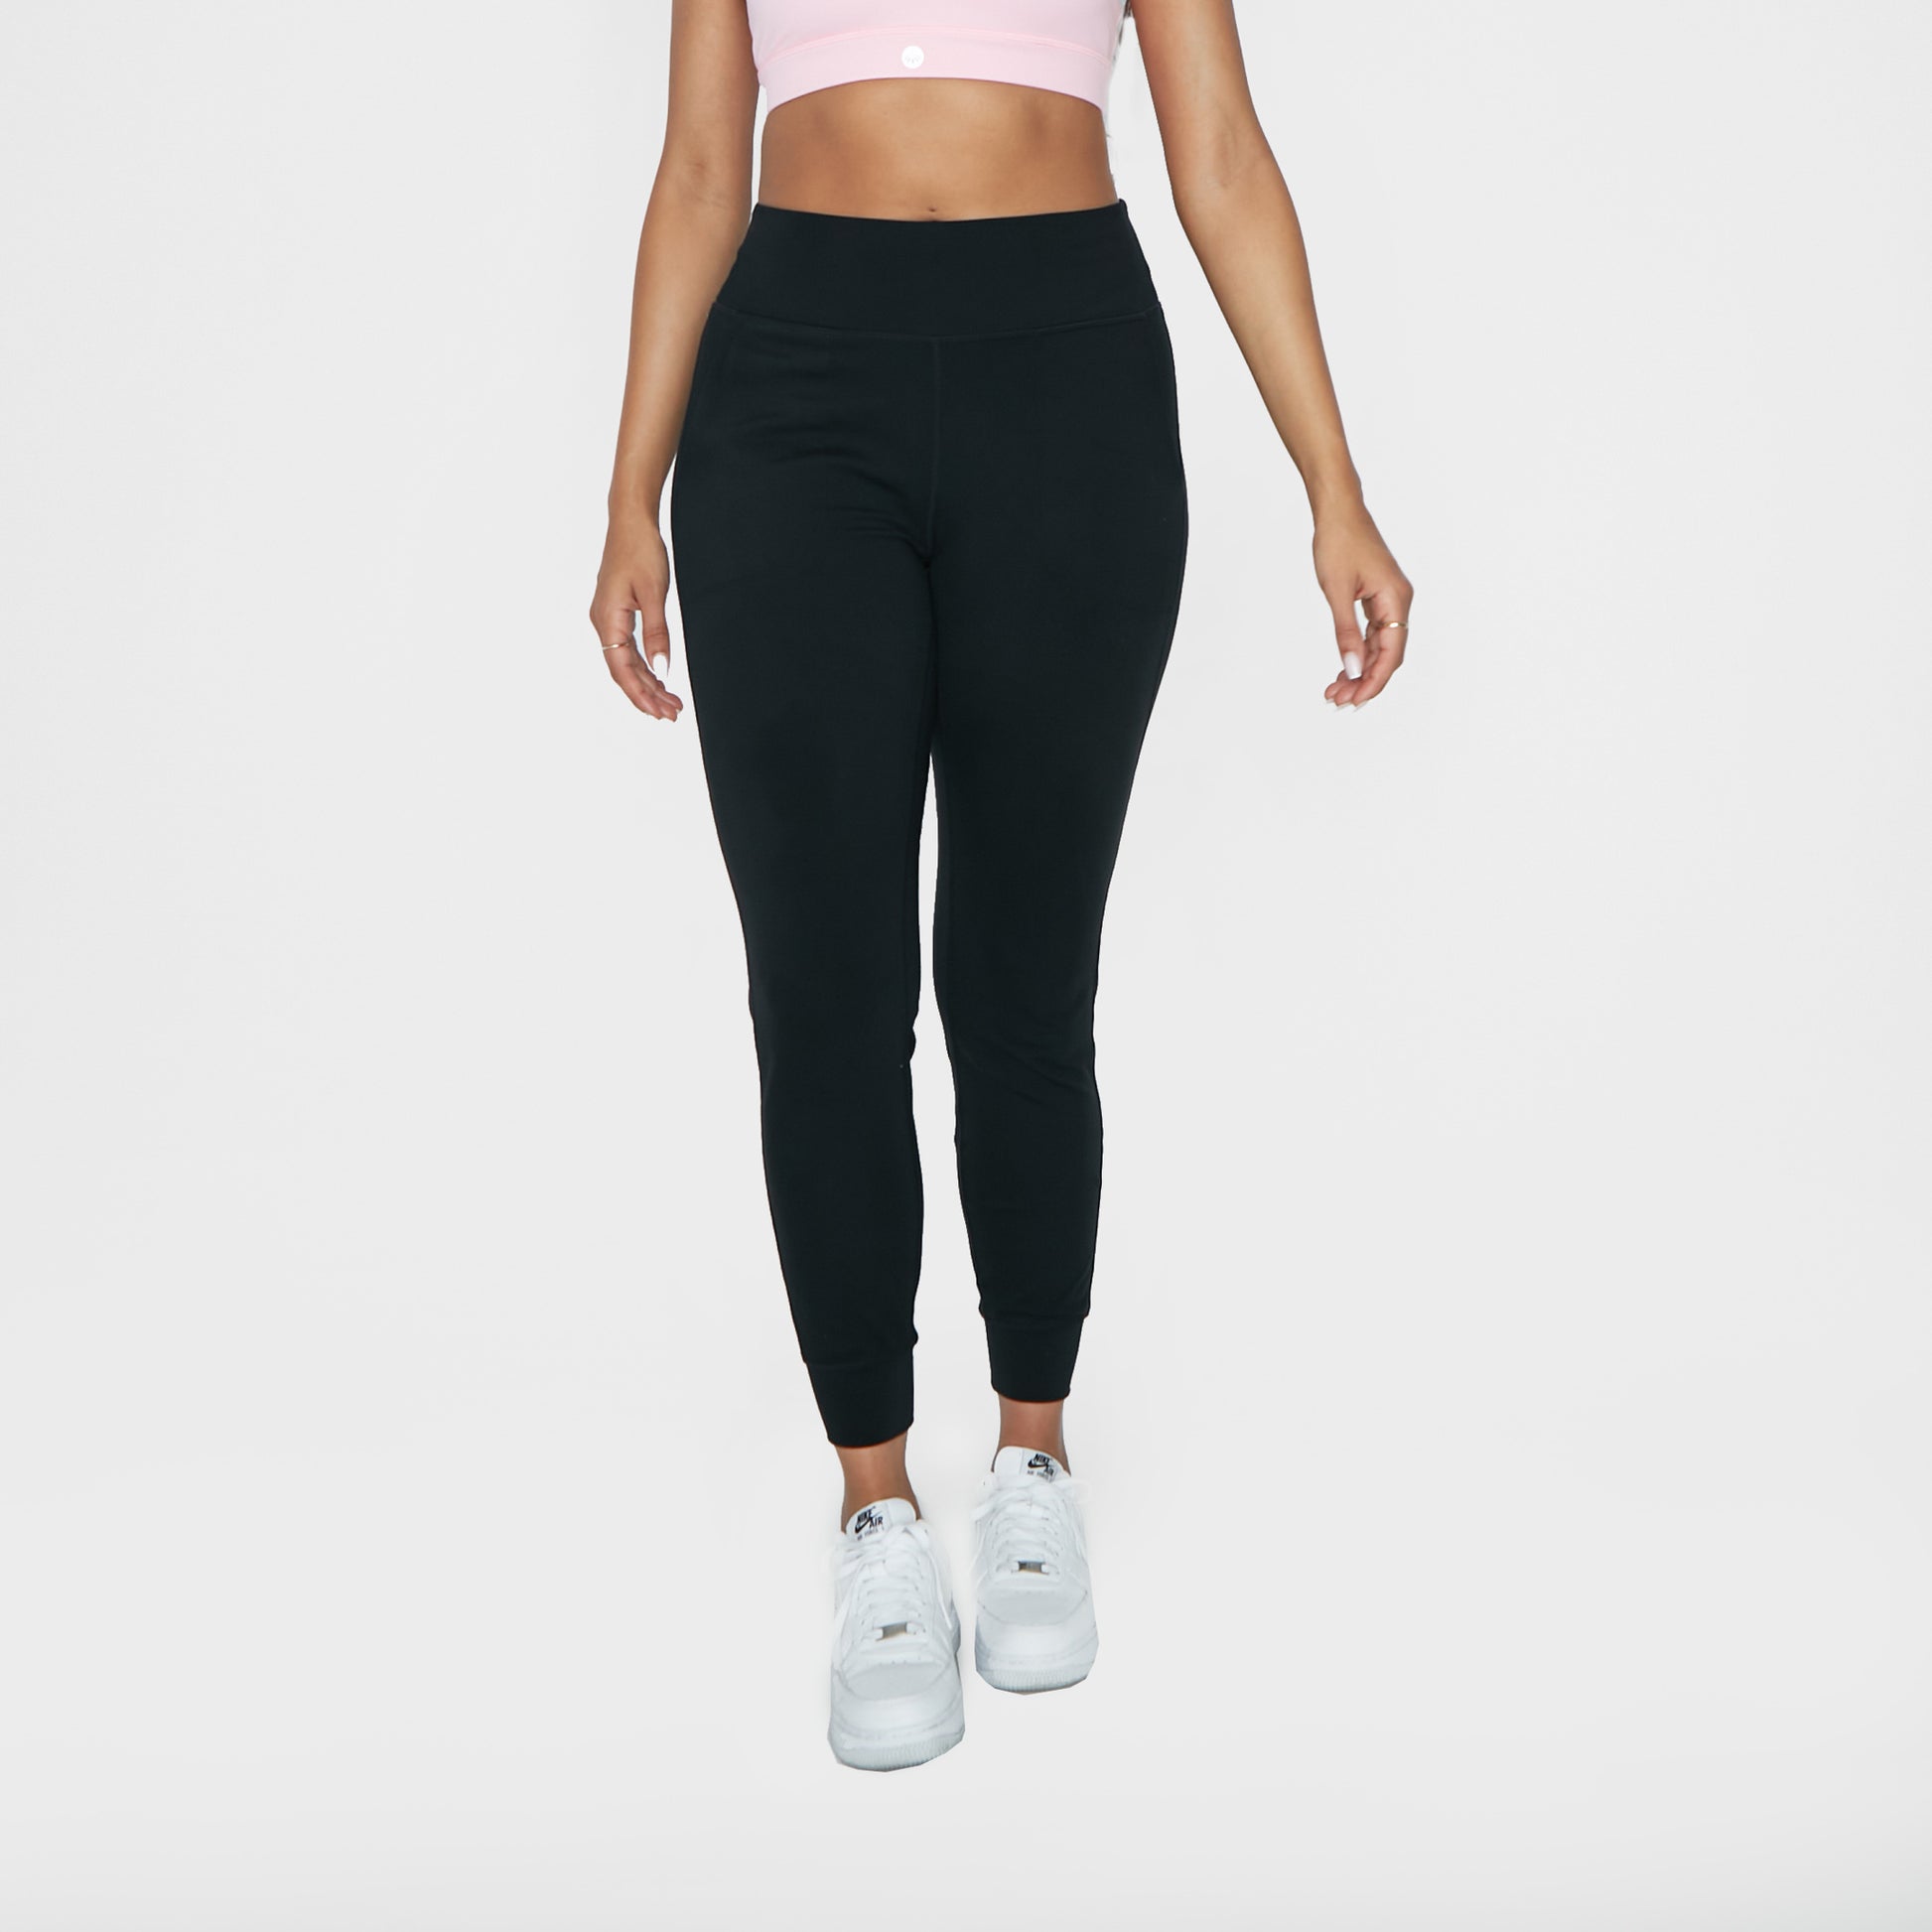 Nike Mother Nature One Tight Legging in Black